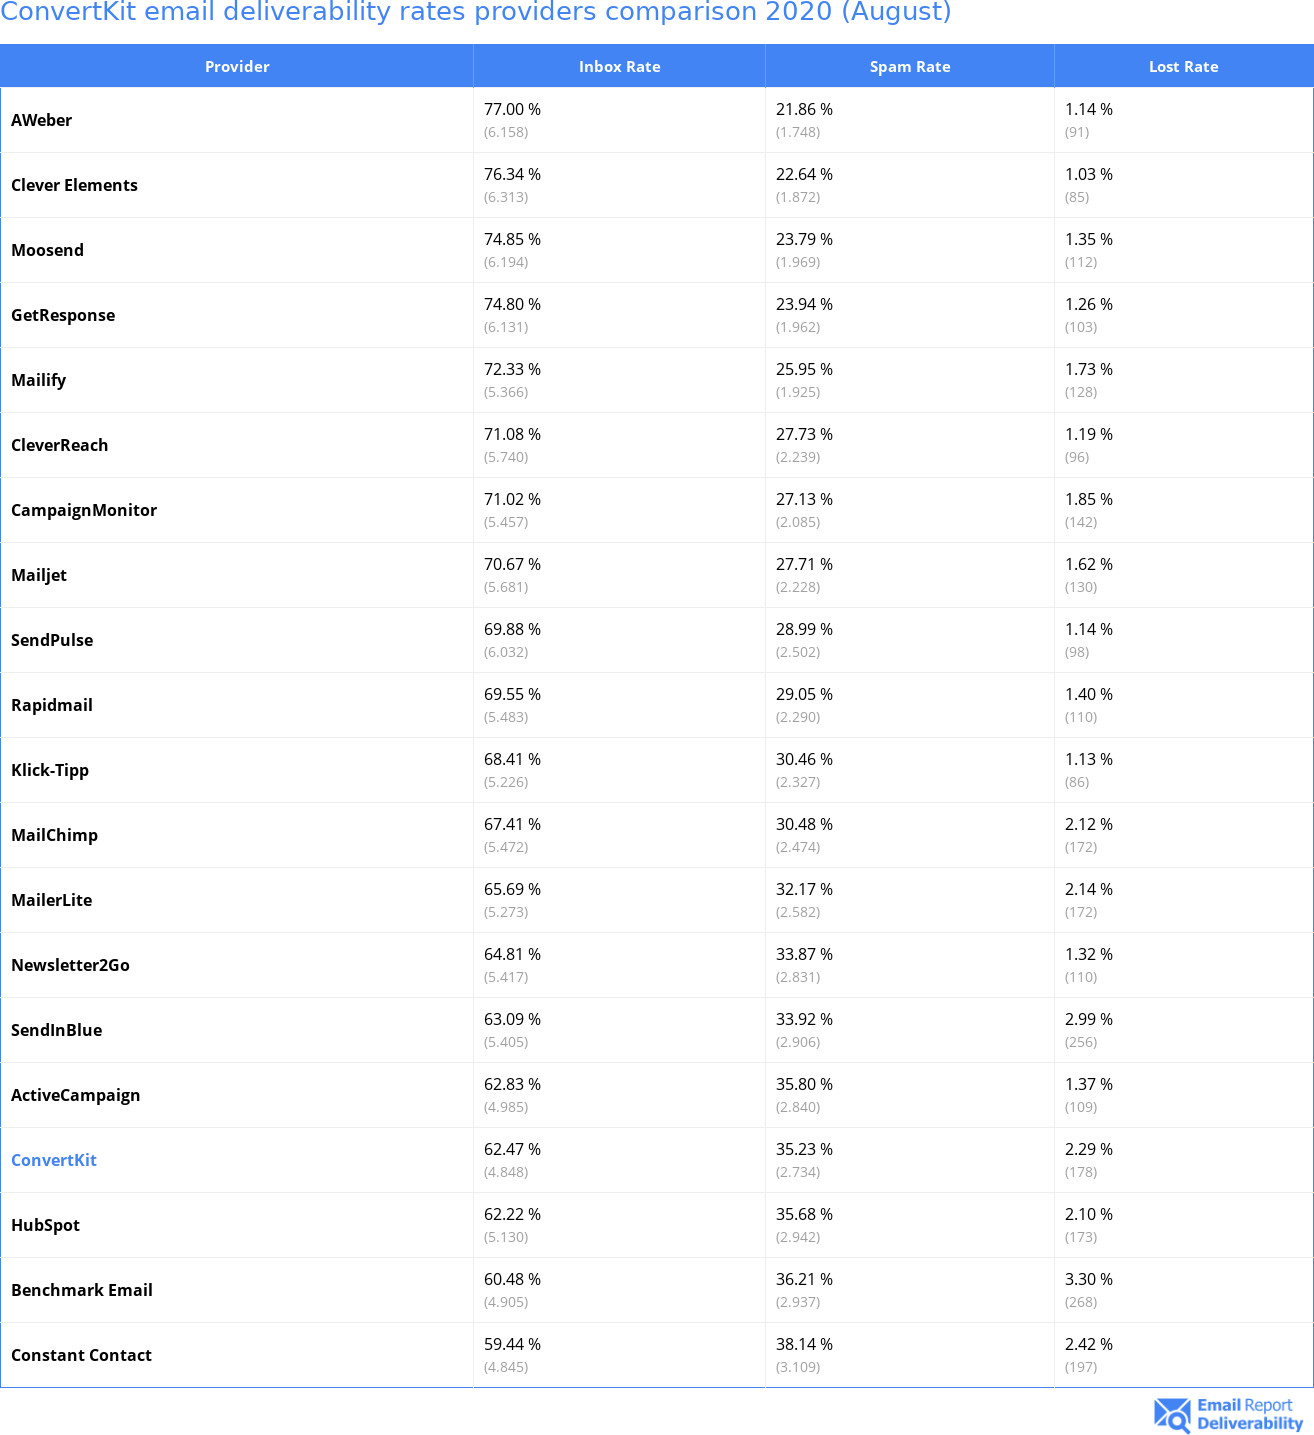 ConvertKit email deliverability rates providers comparison 2020 (August)